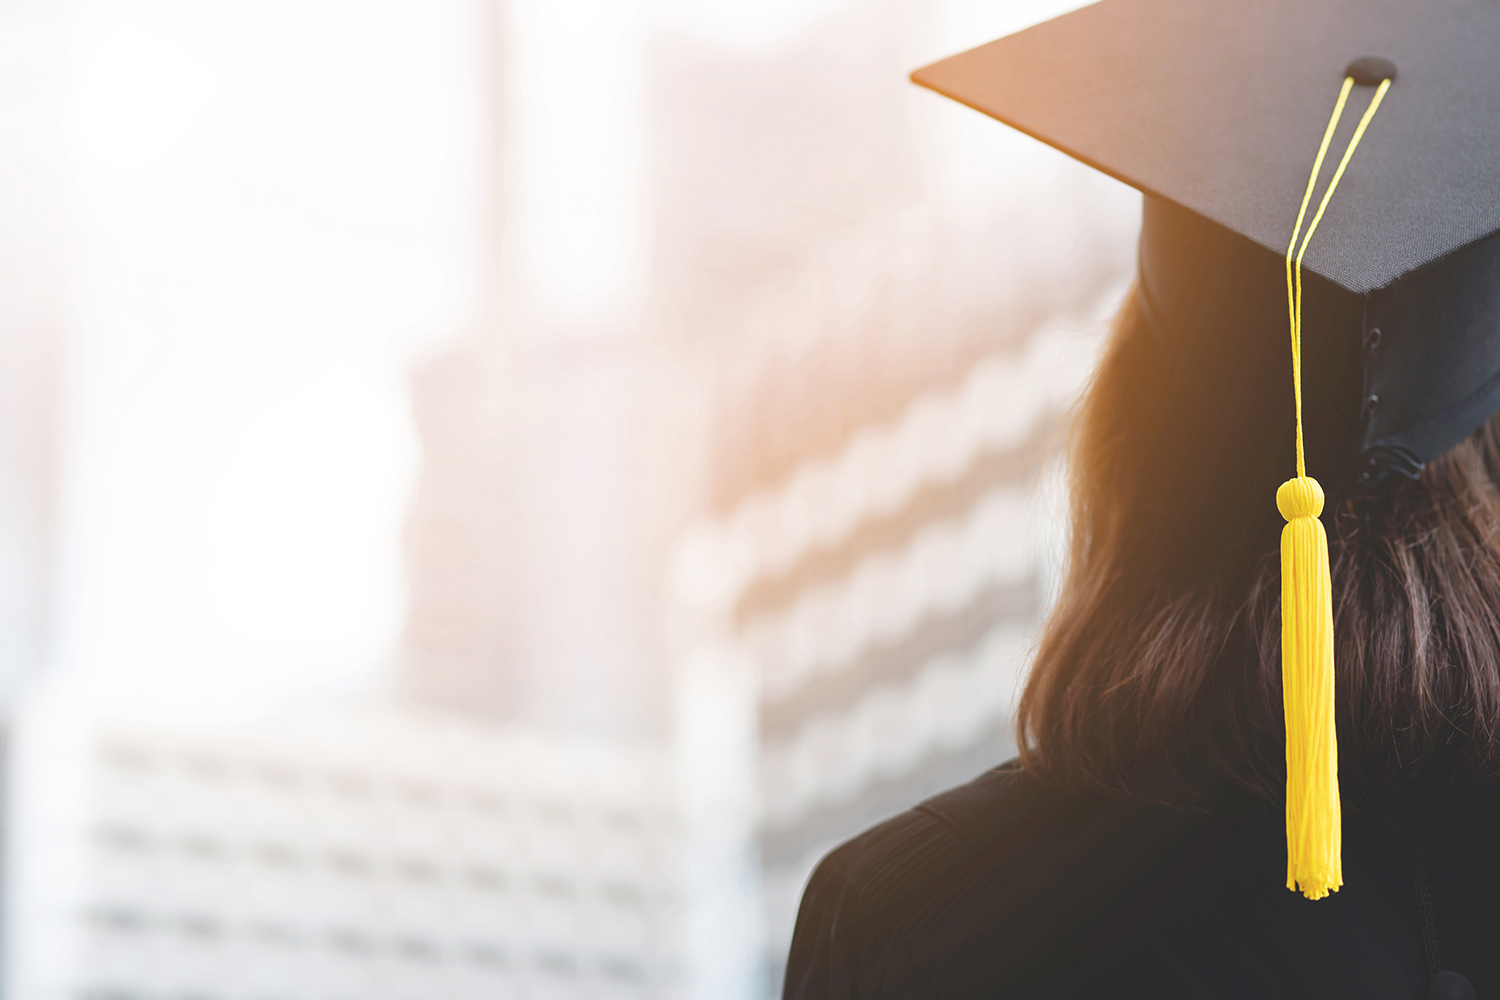 The future of higher education in a disruptive world - KPMG Global